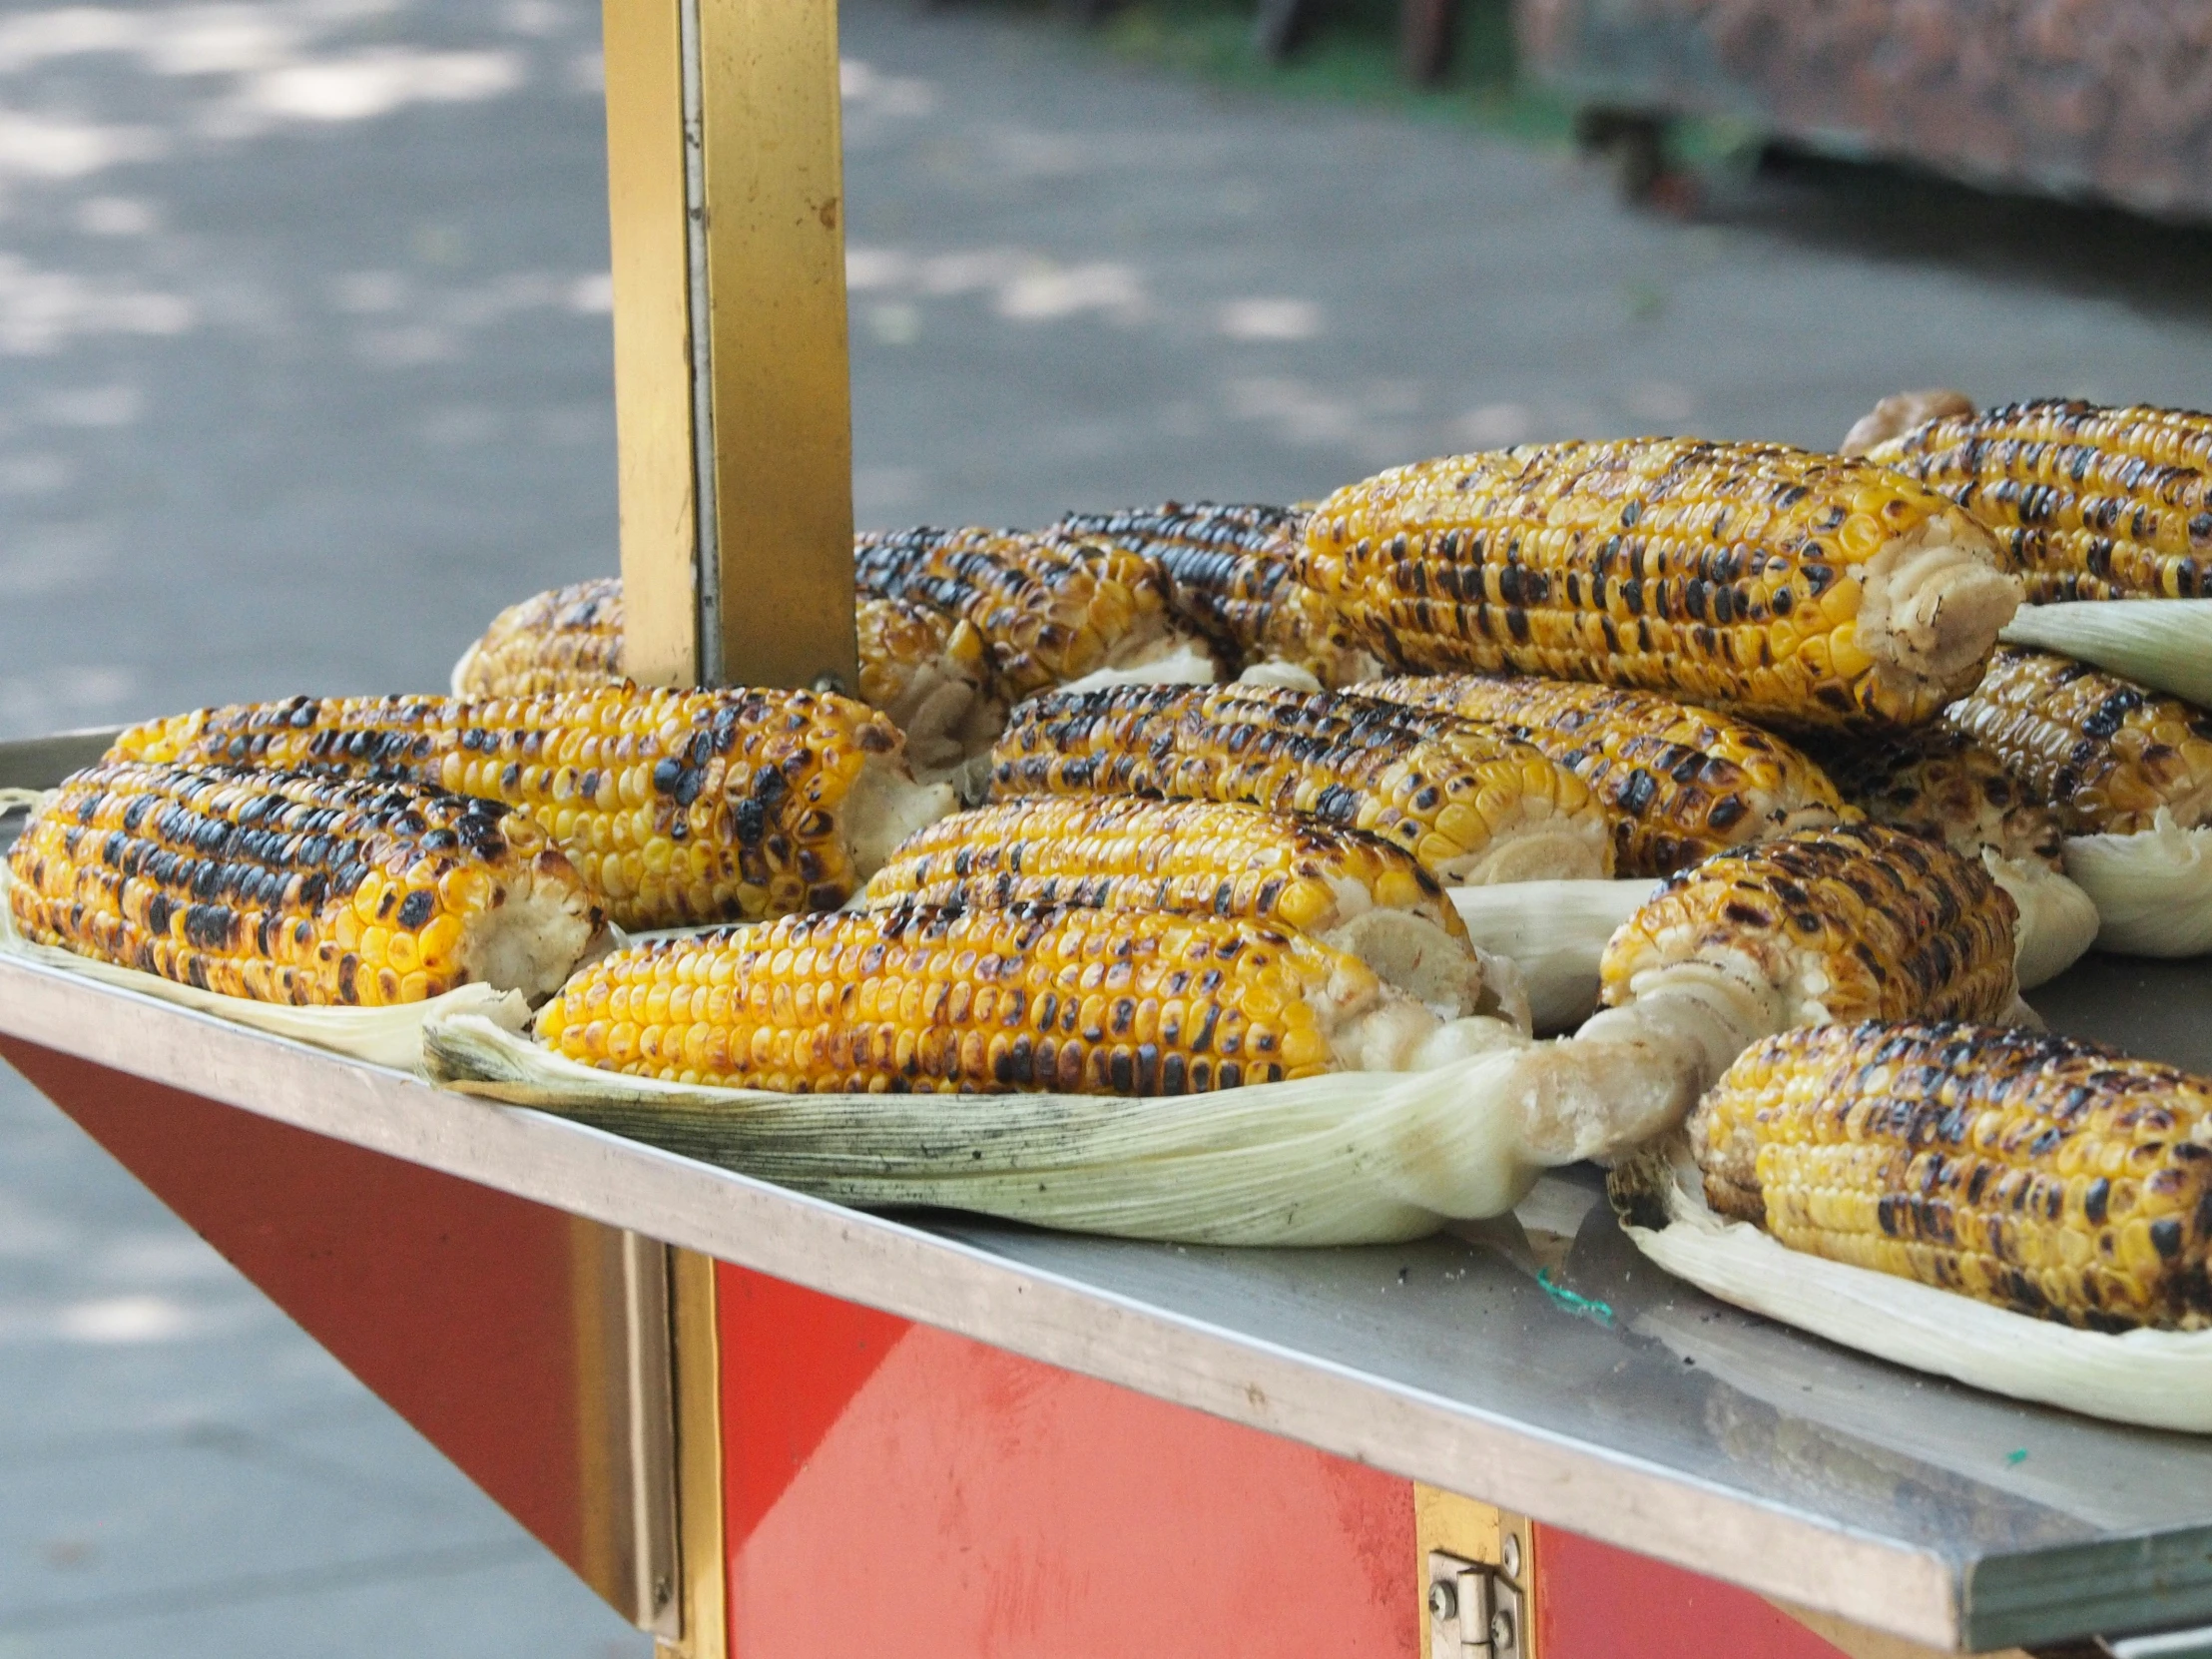 corn is being grilled and arranged on a grill